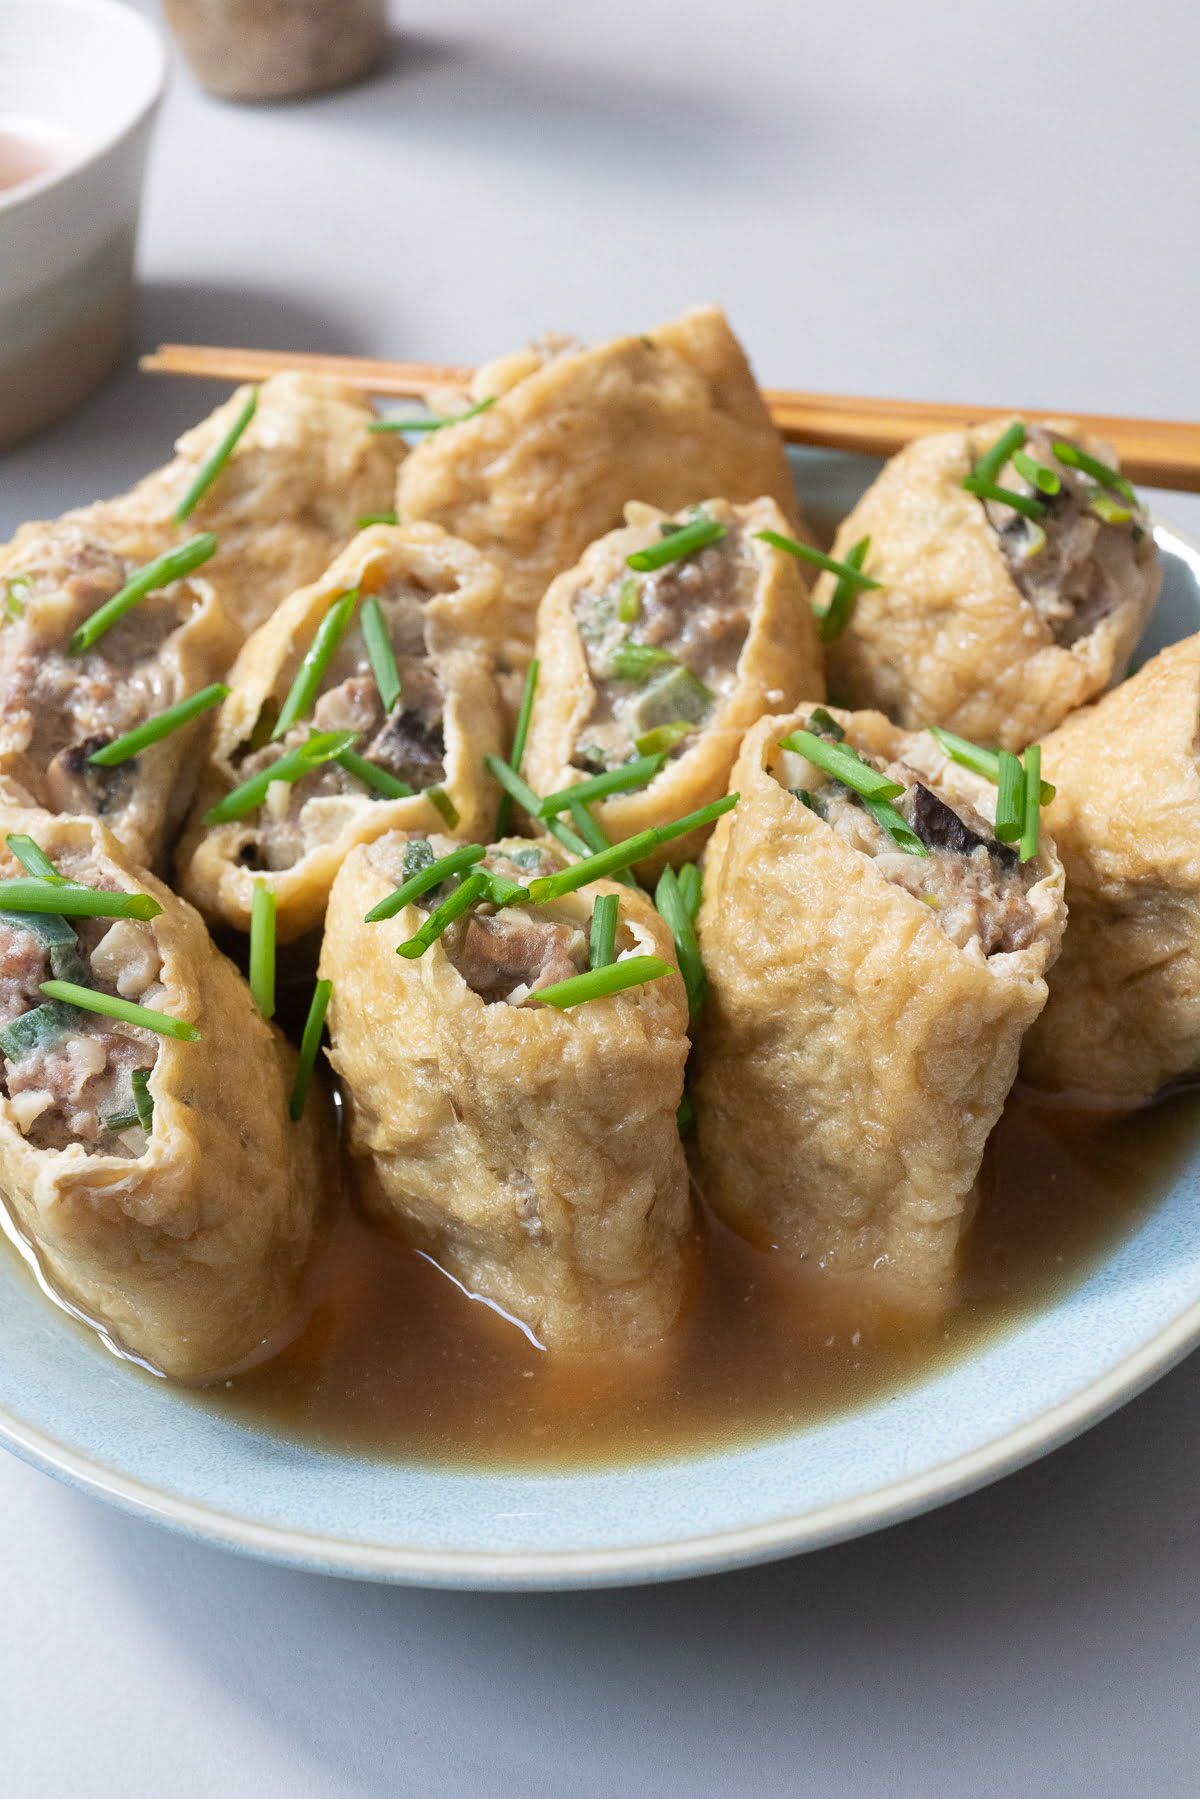 A plate of stuffed aburage, ready to eat.